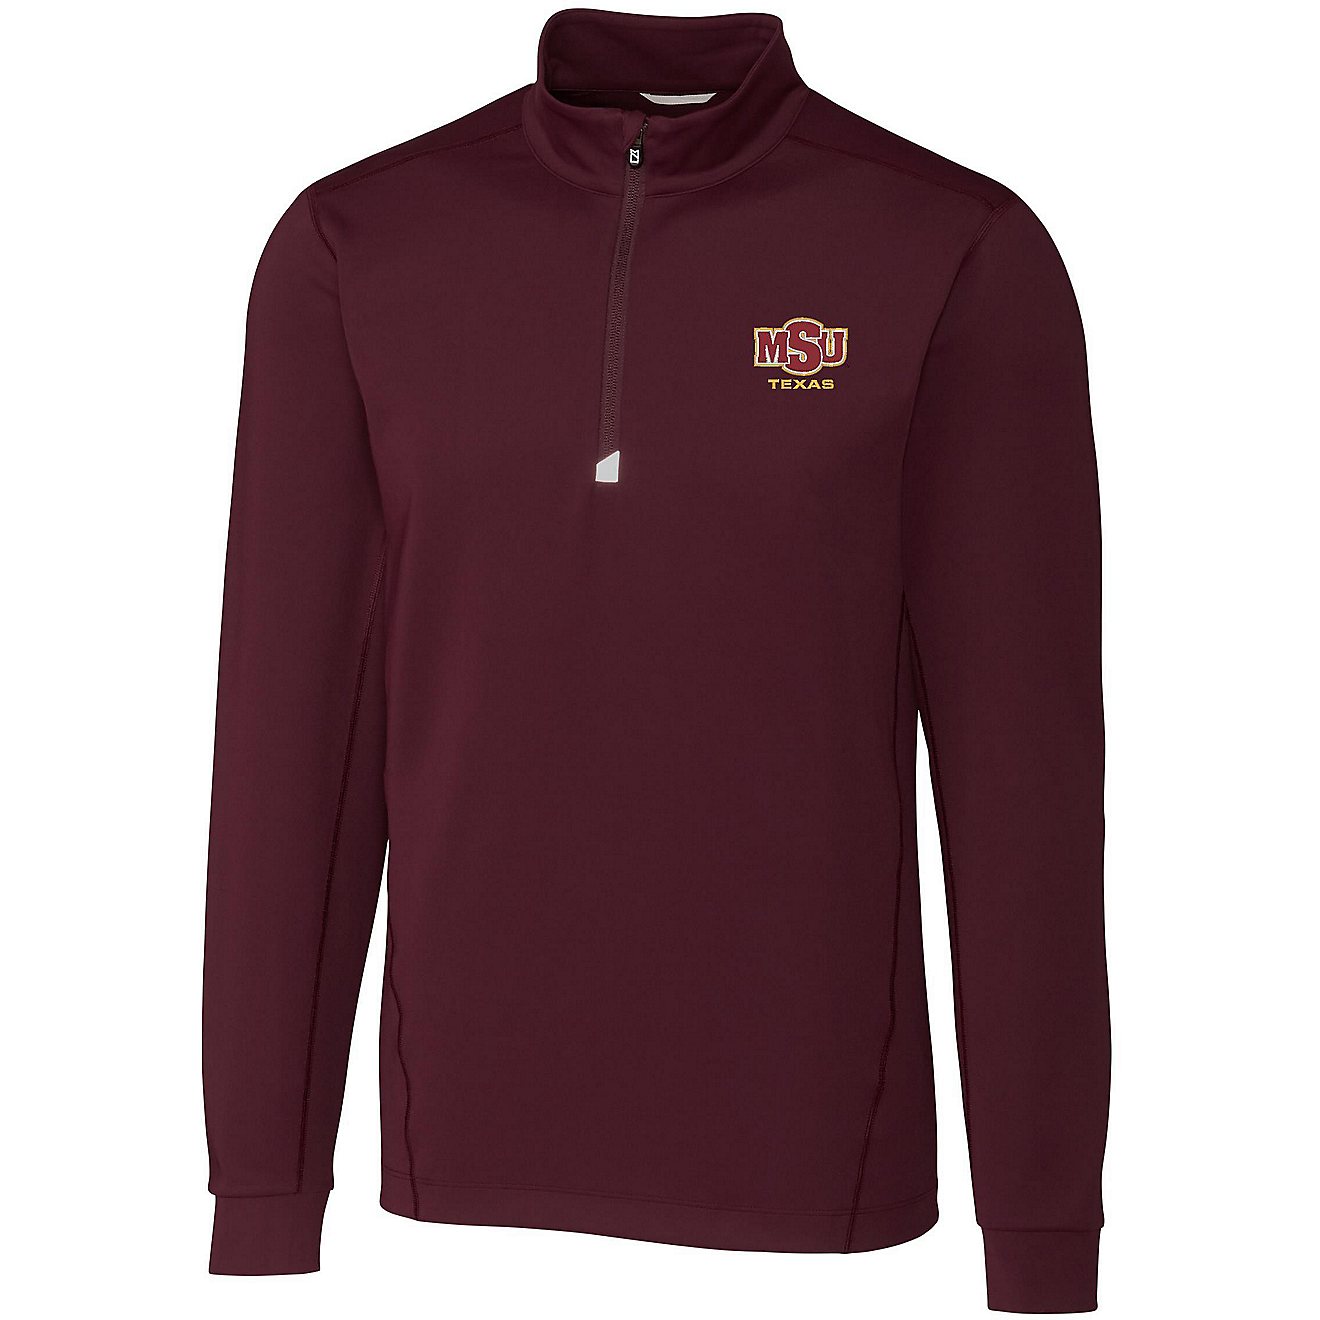 Cutter & Buck Men's Midwestern State University Traverse Pullover Top                                                            - view number 1